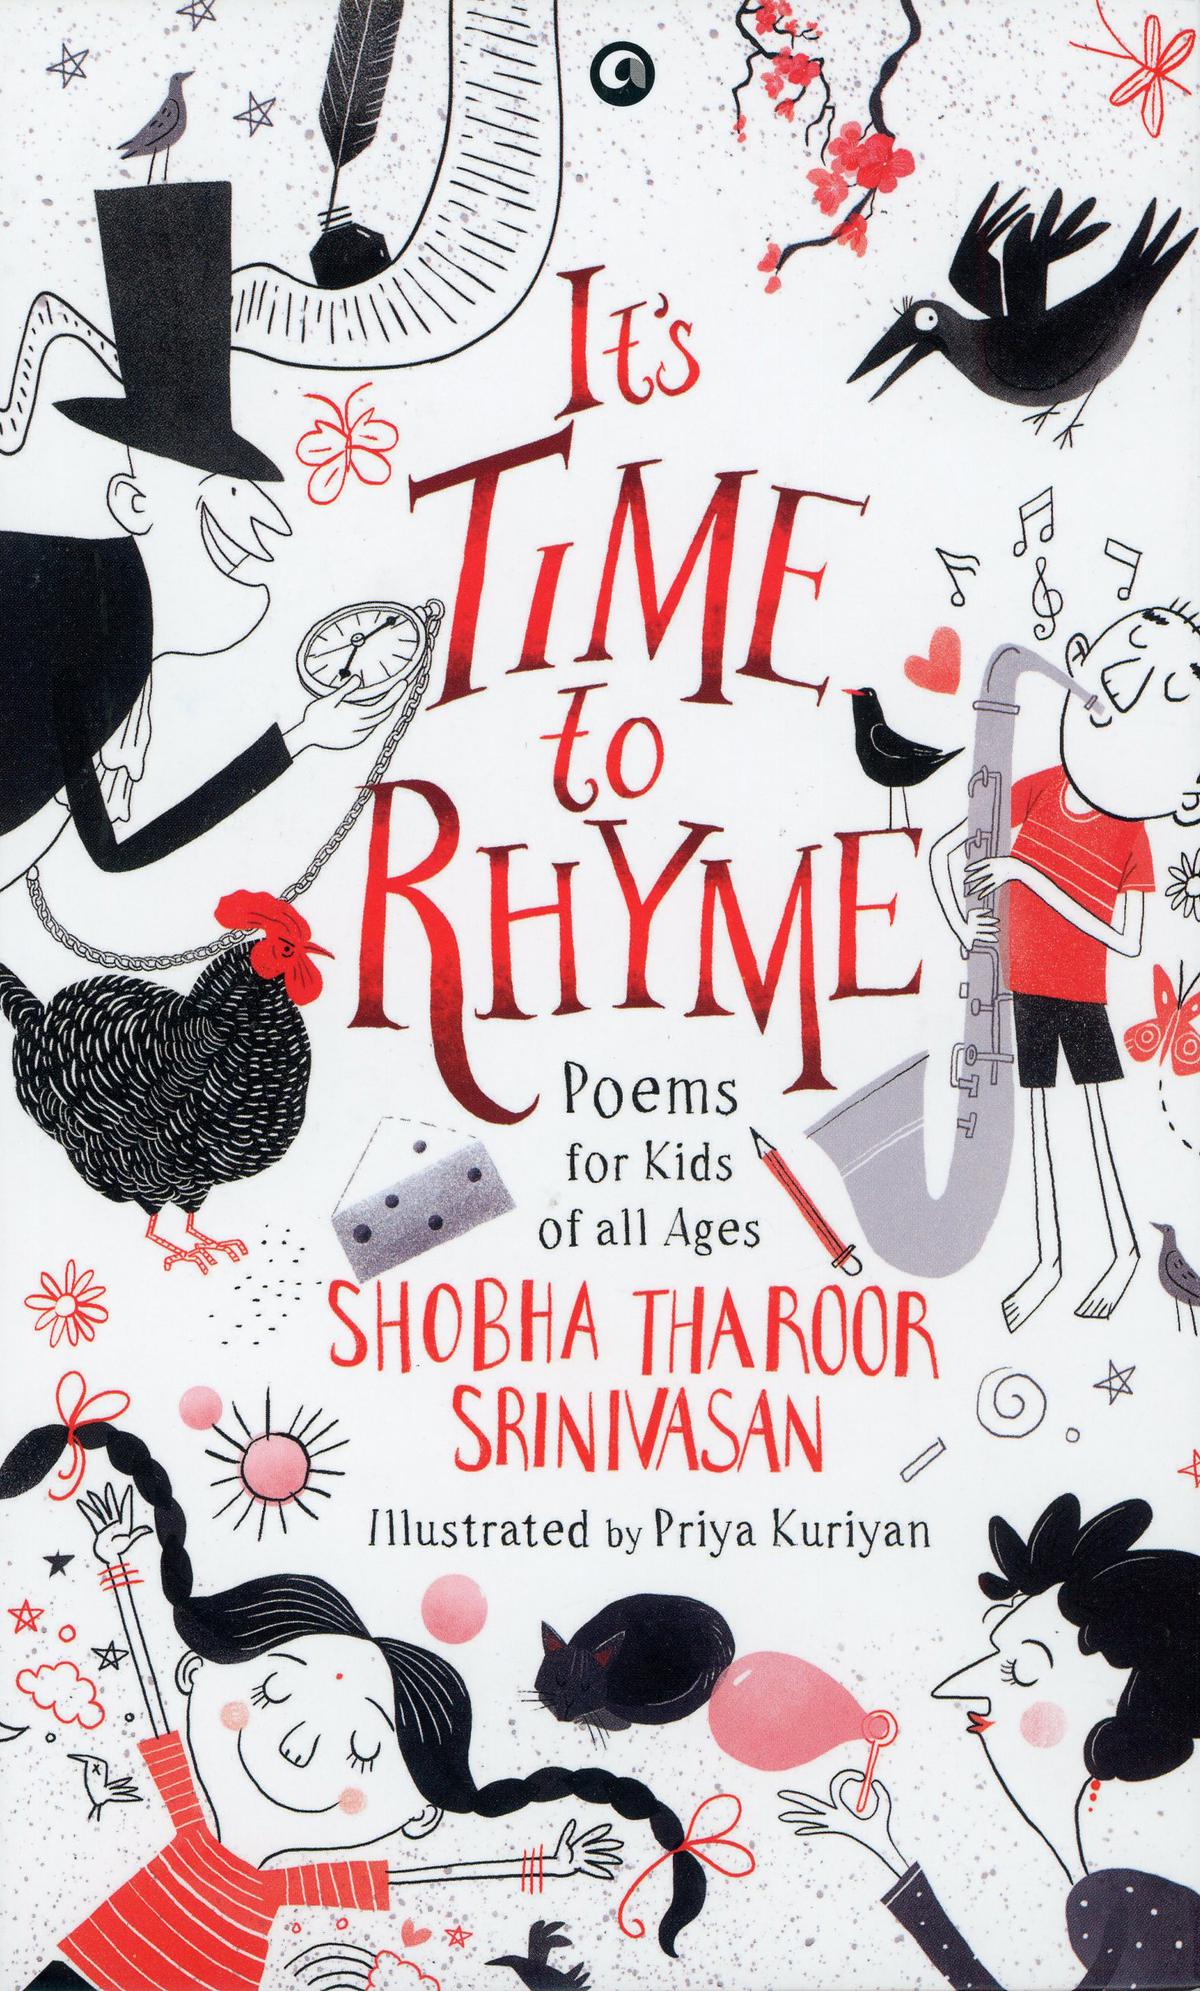 Shobha Tharoor Srinivasan’s  book of poems  to introduce children to poetry and the music of words